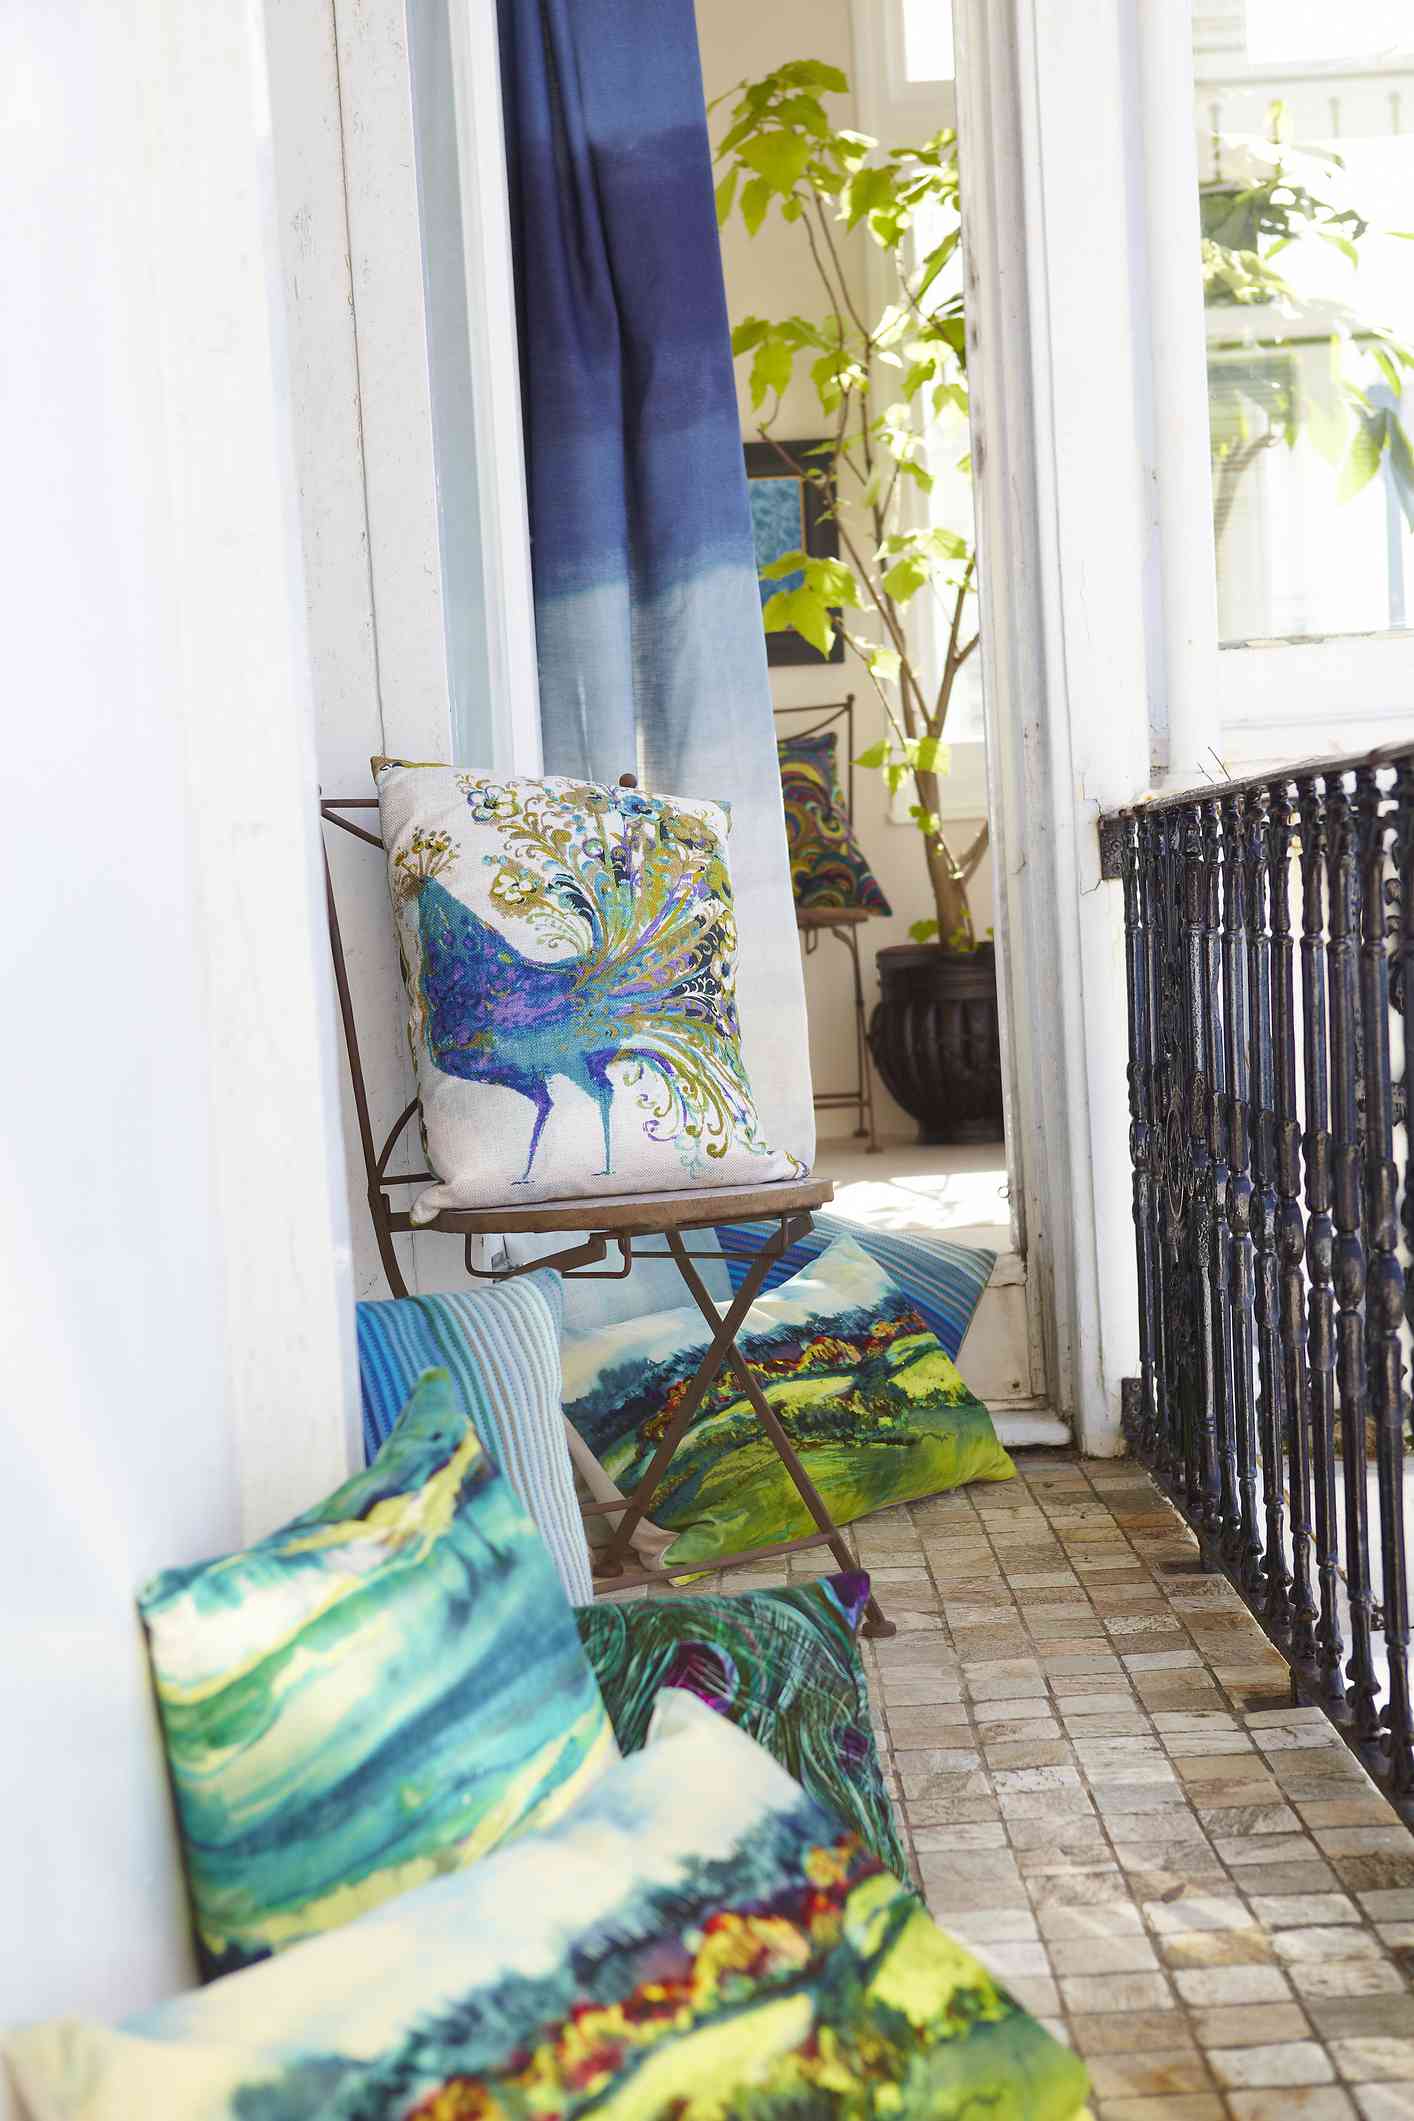 Balcony view with colorful peacock cushions on a chair